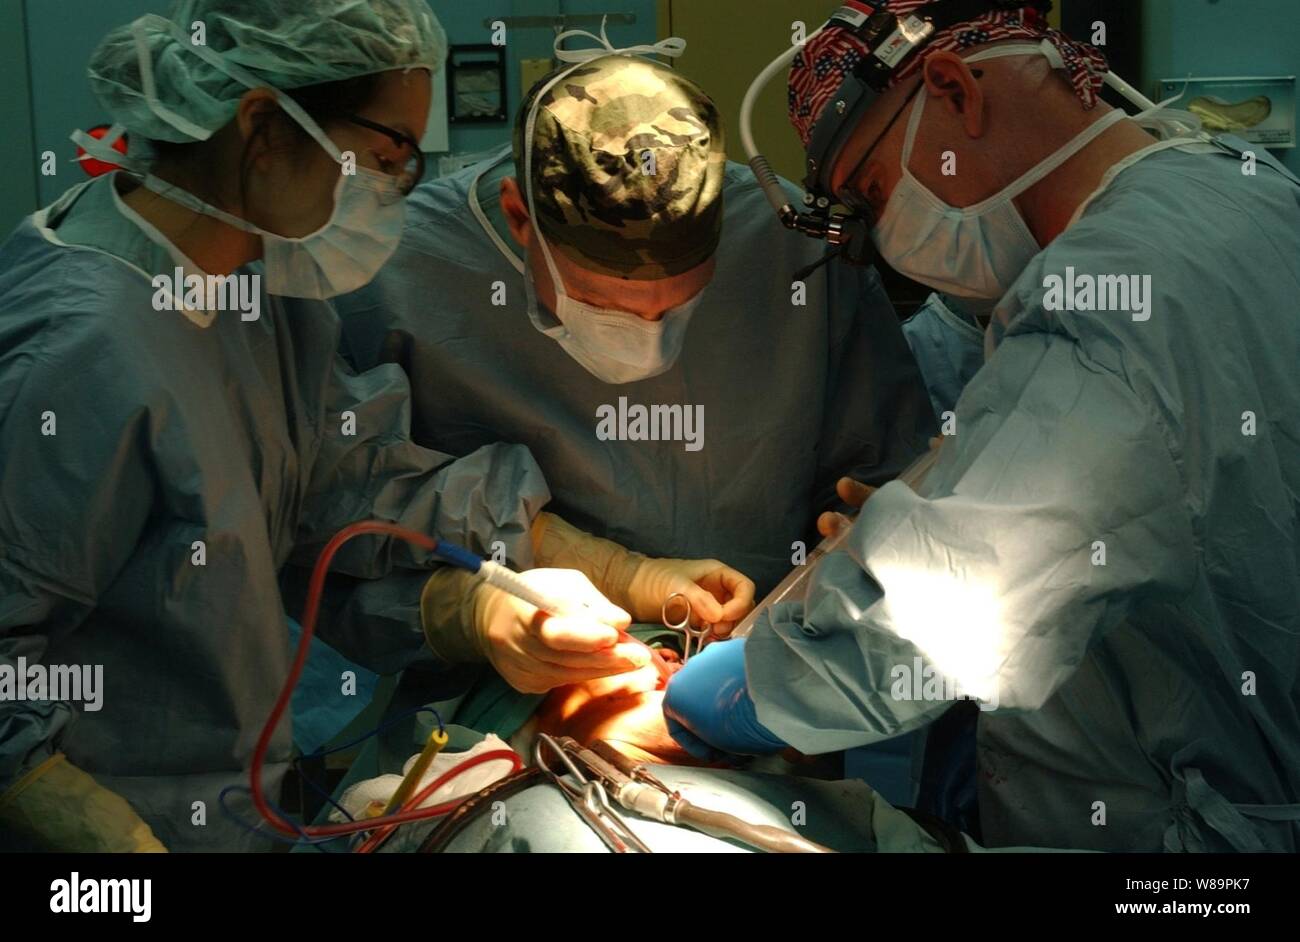 Navy Lt. Joyce Yang (left) DDS, Lt. Cmdr. Terence Johnson (center) M.D., and Cmdr. Kurt Hummeldorf (right) DDS, perform oral surgery on an Indonesian man to remove a cyst from his mouth onboard the hospital ship USNS Mercy (T-AH 19) on Feb. 18 2005.  Mercy is operating off the coast of Banda Aceh, Indonesia, providing medical assistance and disaster relief to those affected by the Dec. 26, 2004, Indian Ocean tsunami. Stock Photo